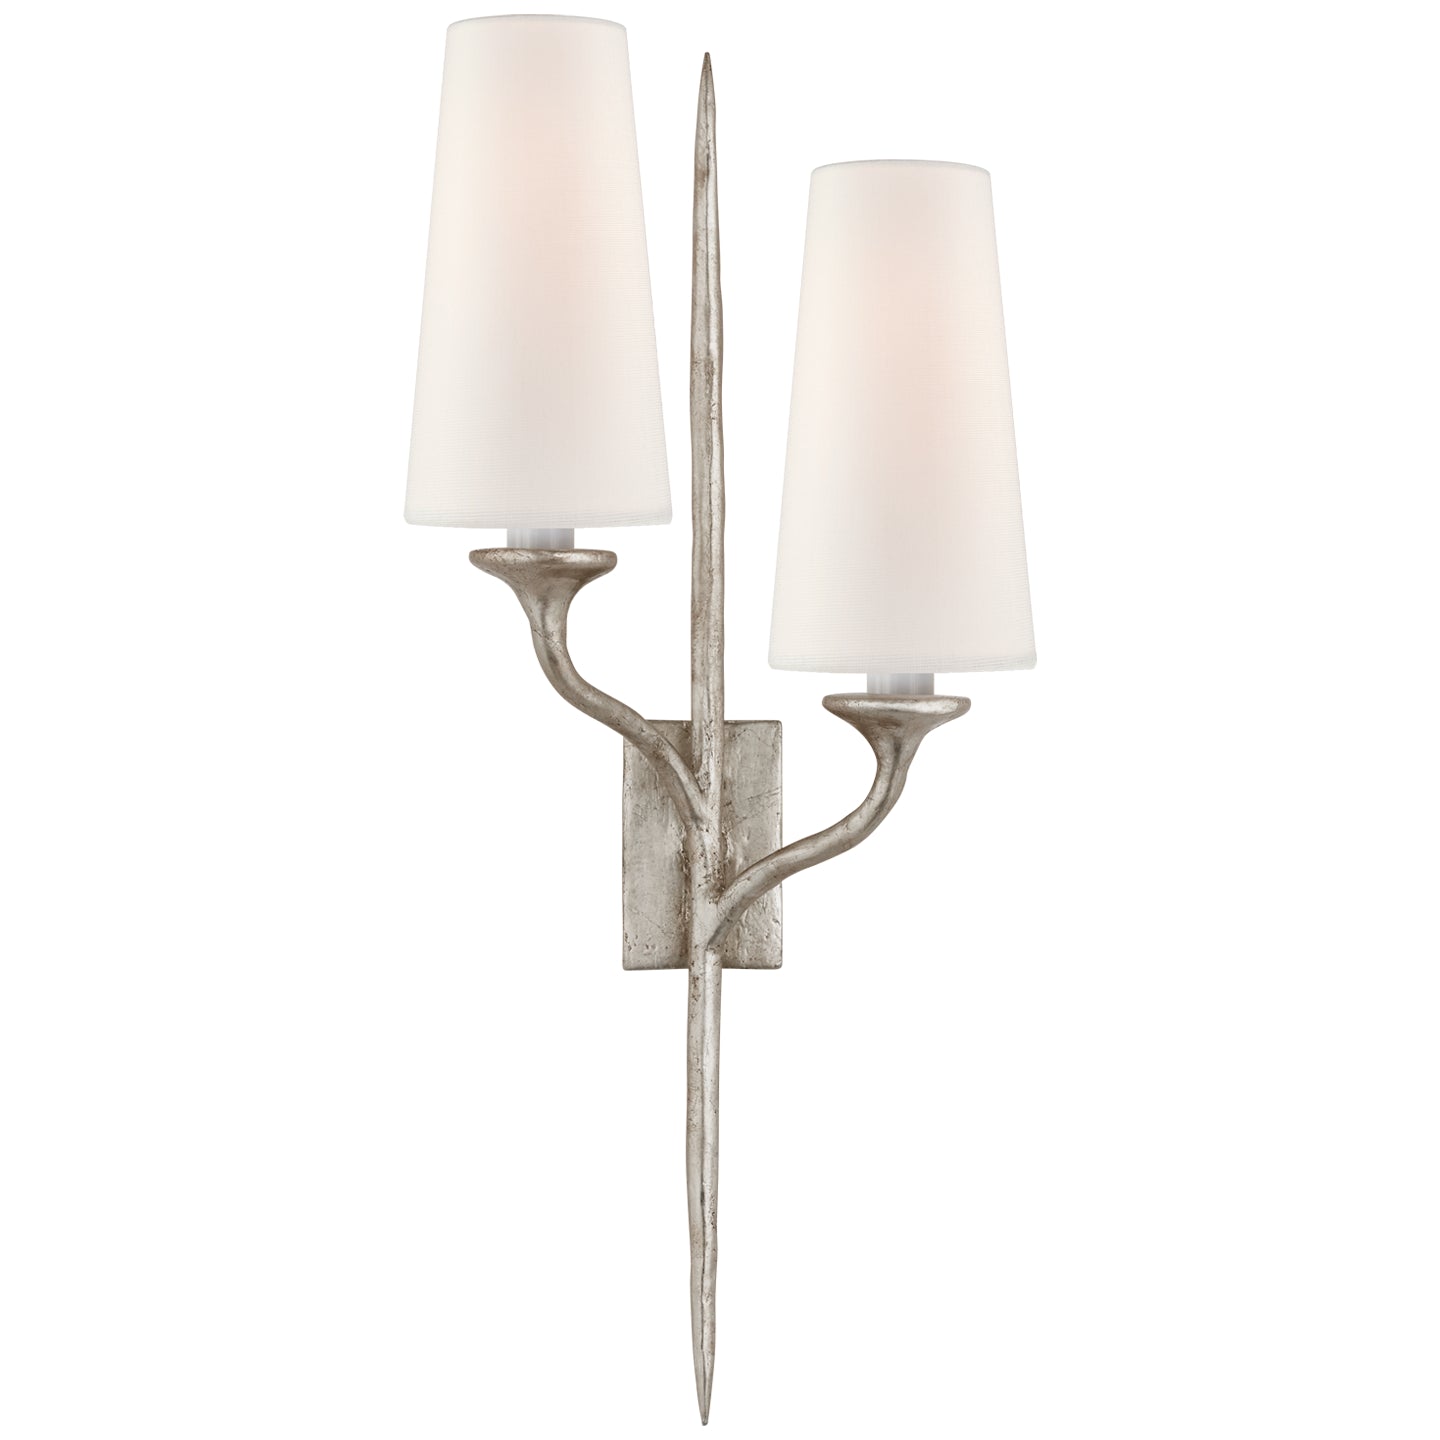 Visual Comfort Signature Canada - Two Light Wall Sconce - Iberia - Burnished Silver Leaf- Union Lighting Luminaires Decor